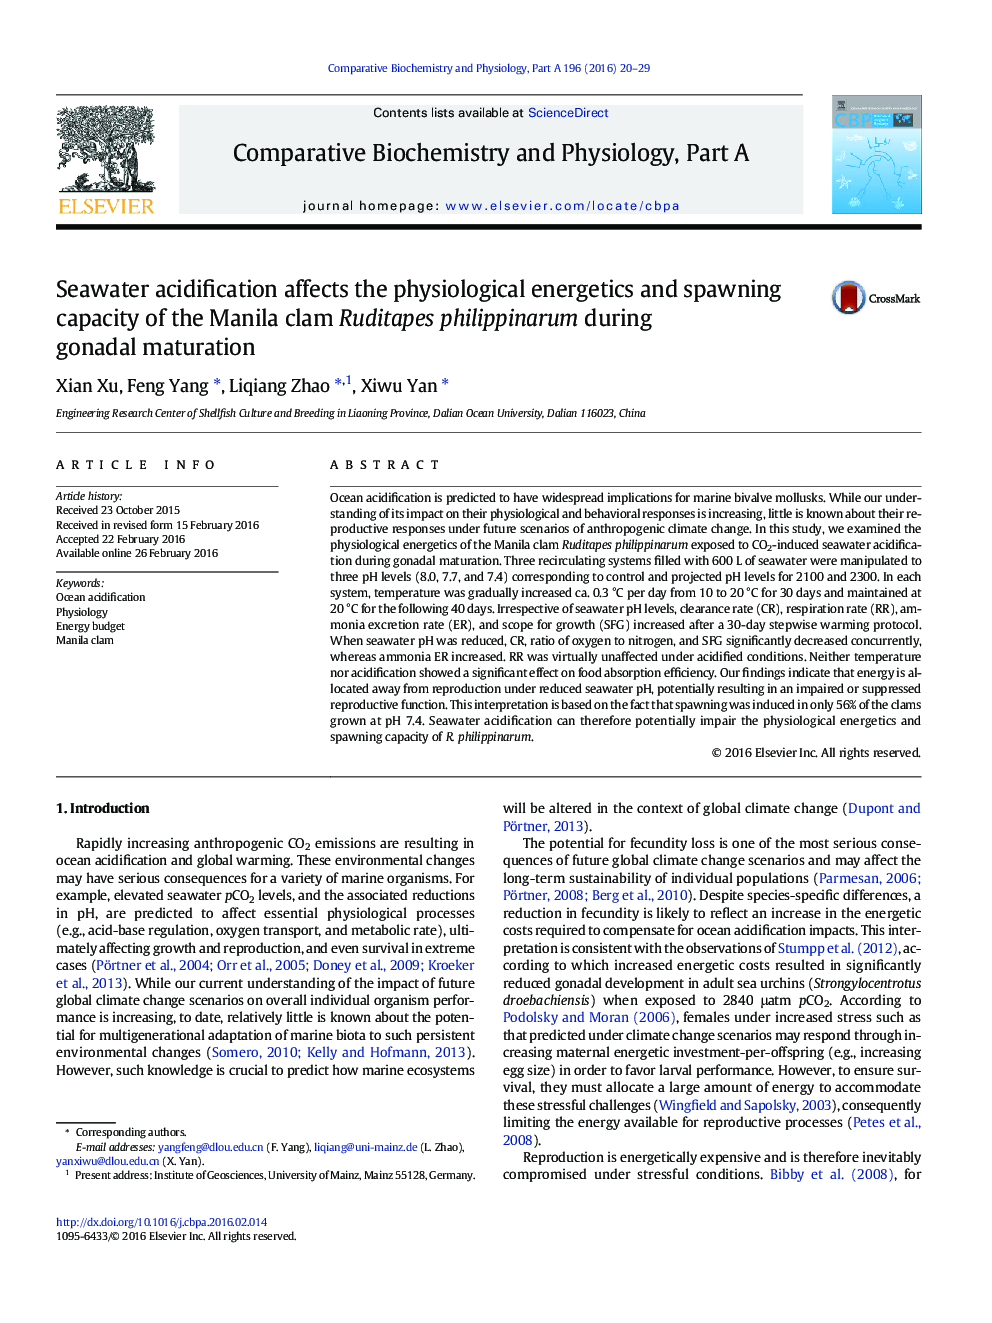 Seawater acidification affects the physiological energetics and spawning capacity of the Manila clam Ruditapes philippinarum during gonadal maturation